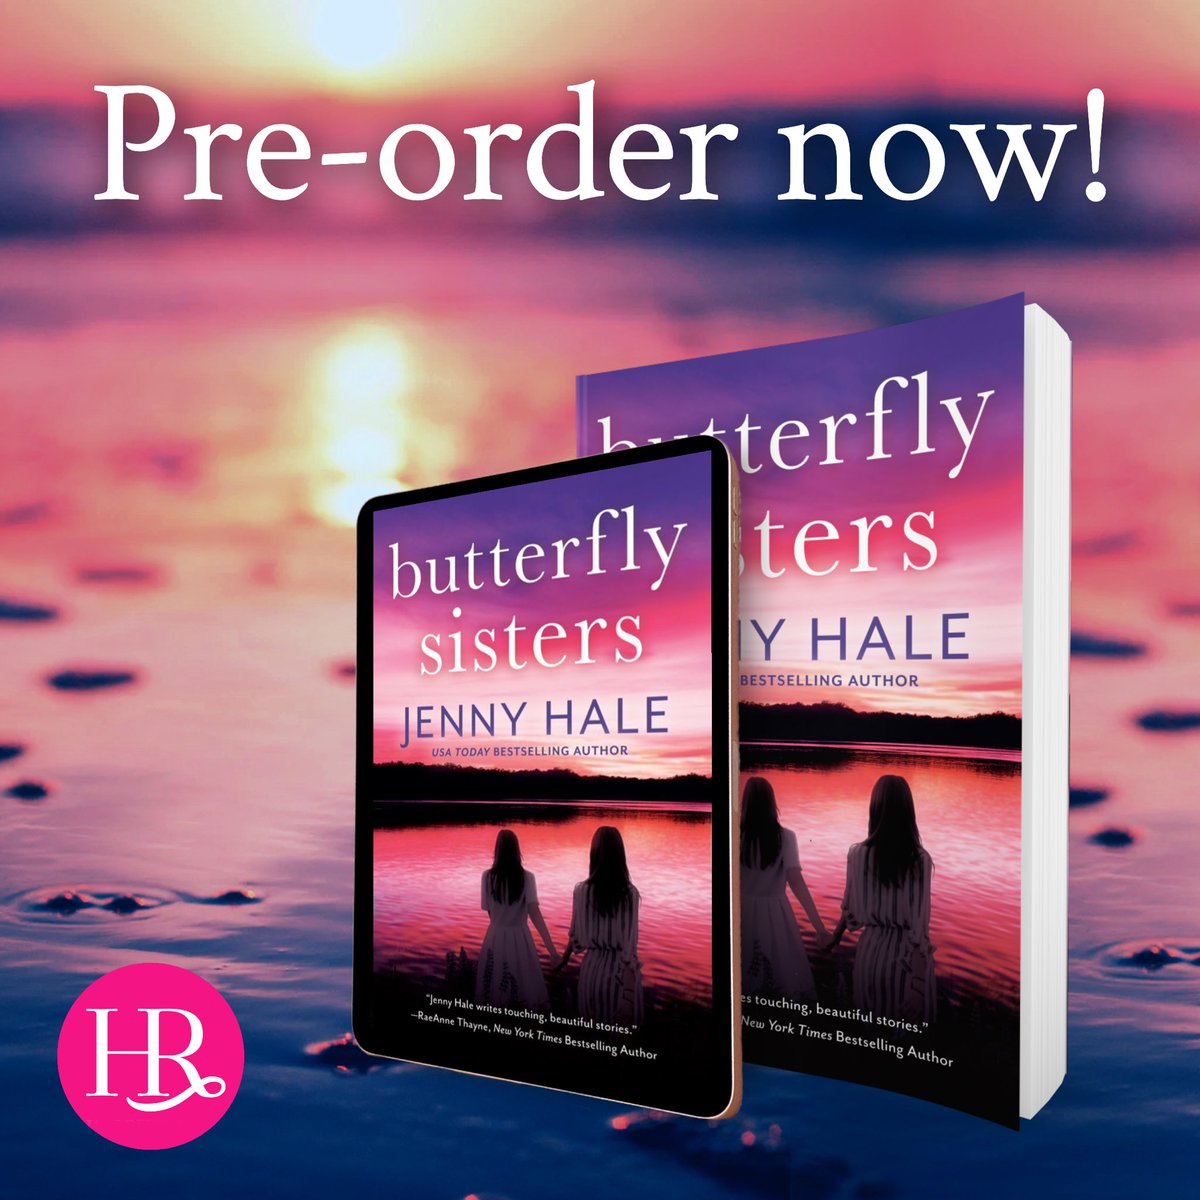 My latest novel Butterfly Sisters is coming out TUESDAY!! Aaaaaaaahhhhhhhhhh!! Get it now!!

PRE-ORDER HERE: 
Amazon: https://t.co/sSFxrdCCxC
Google: https://t.co/zp0hRArjBt
Apple : https://t.co/puAQ0GdRAw
Kobo: https://t.co/BUJW1Docnu https://t.co/jx2jaf8zBK